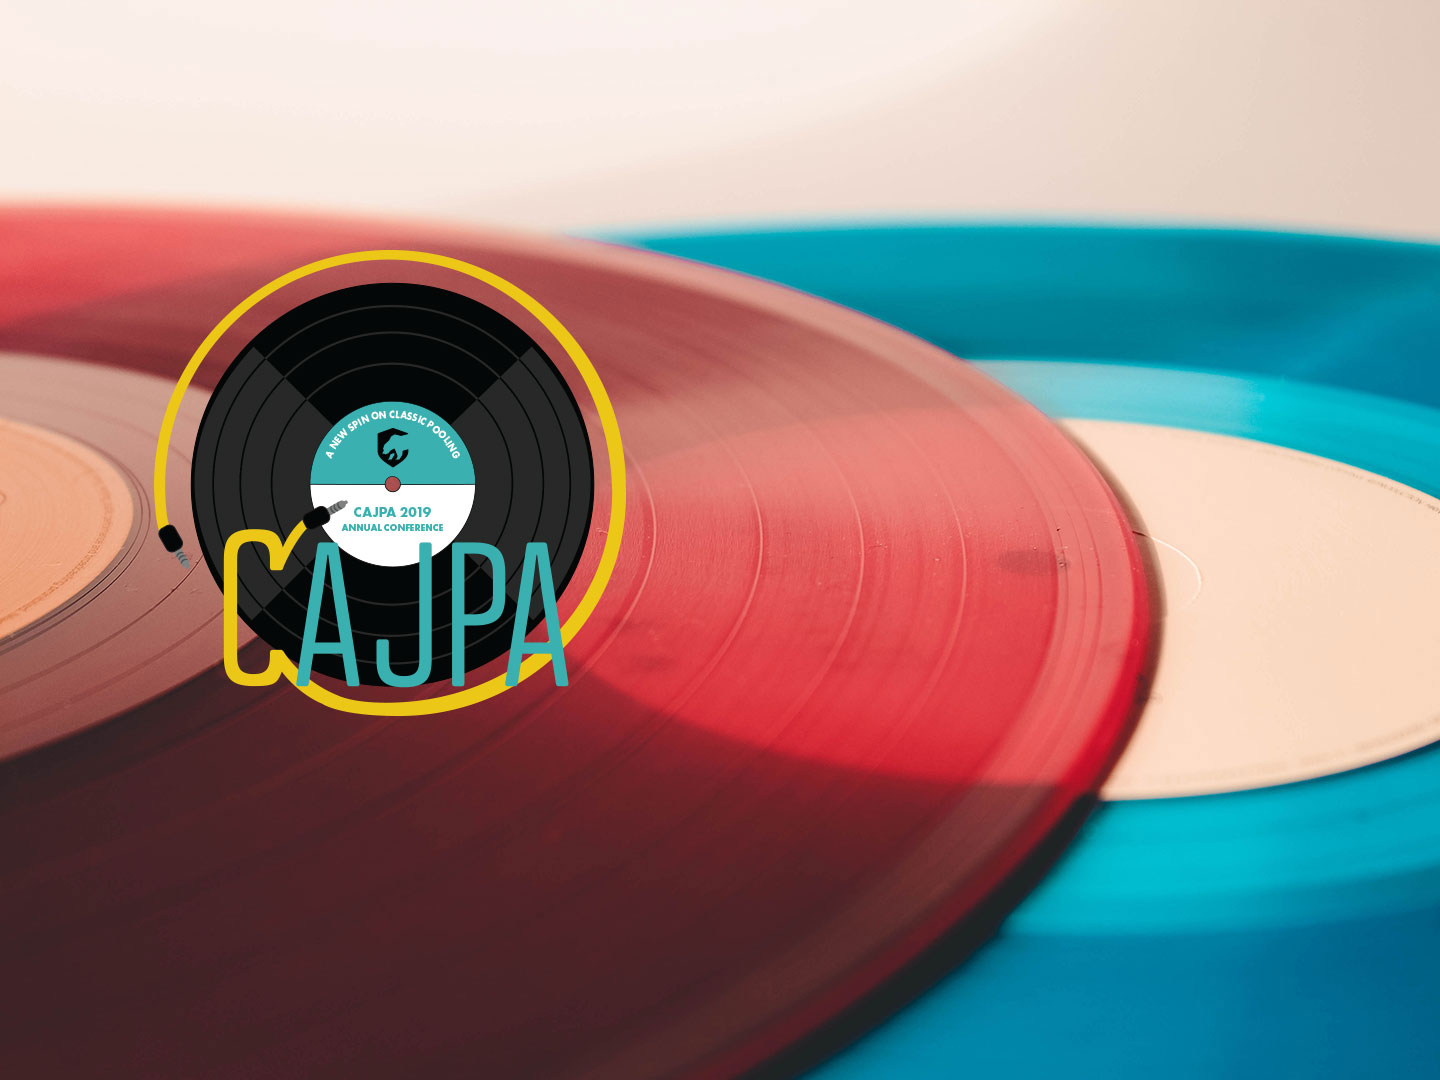 CAJPA Conference – A New Spin on Classic Pooling